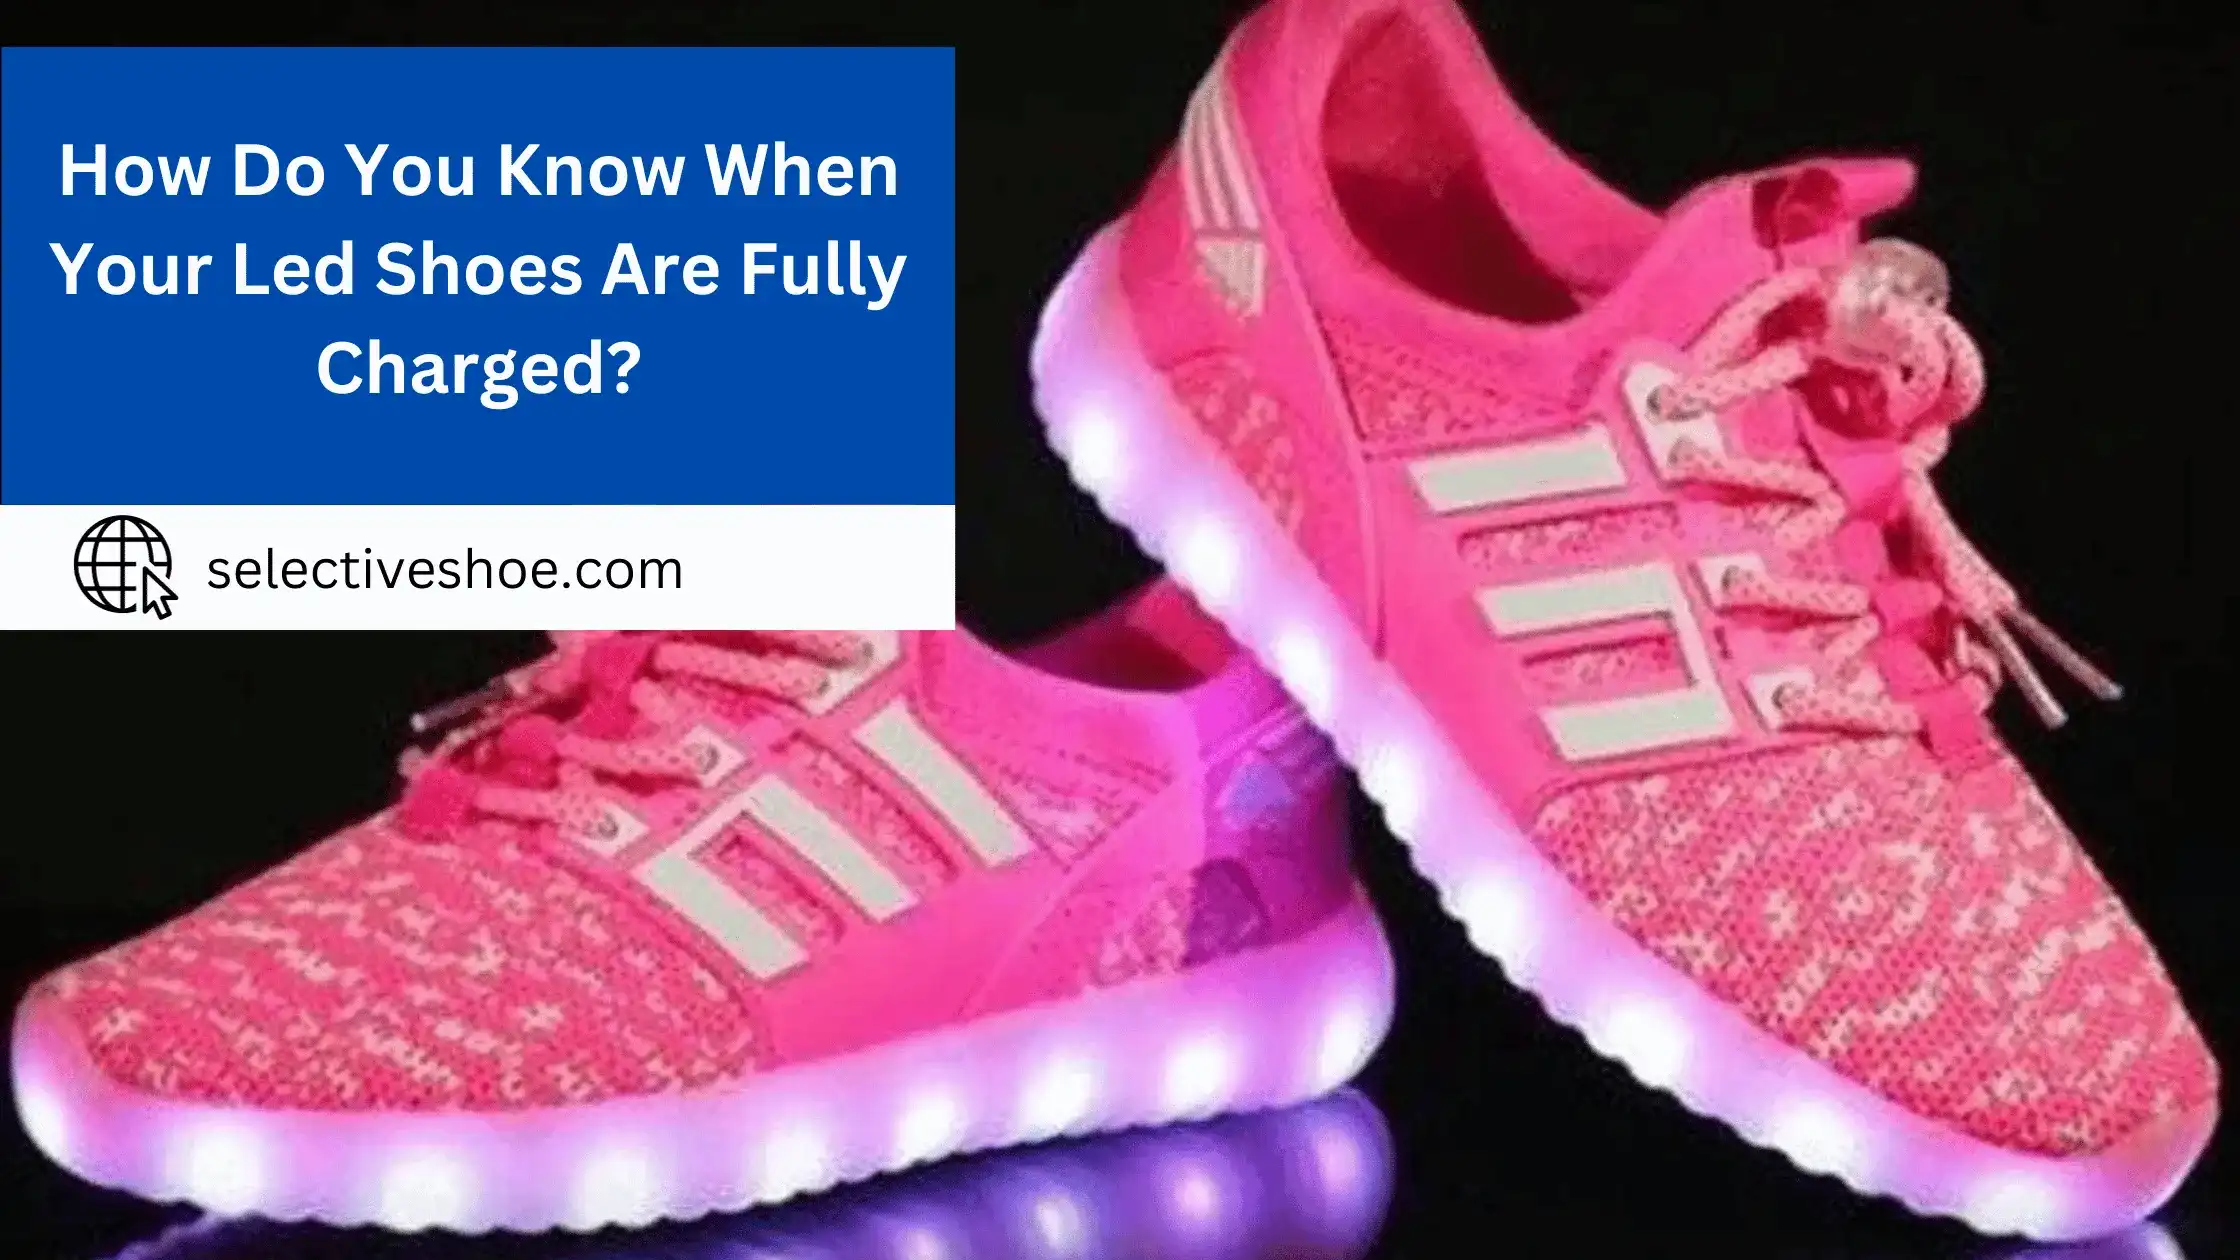 How Do You Know When Your Led Shoes Are Fully Charged?